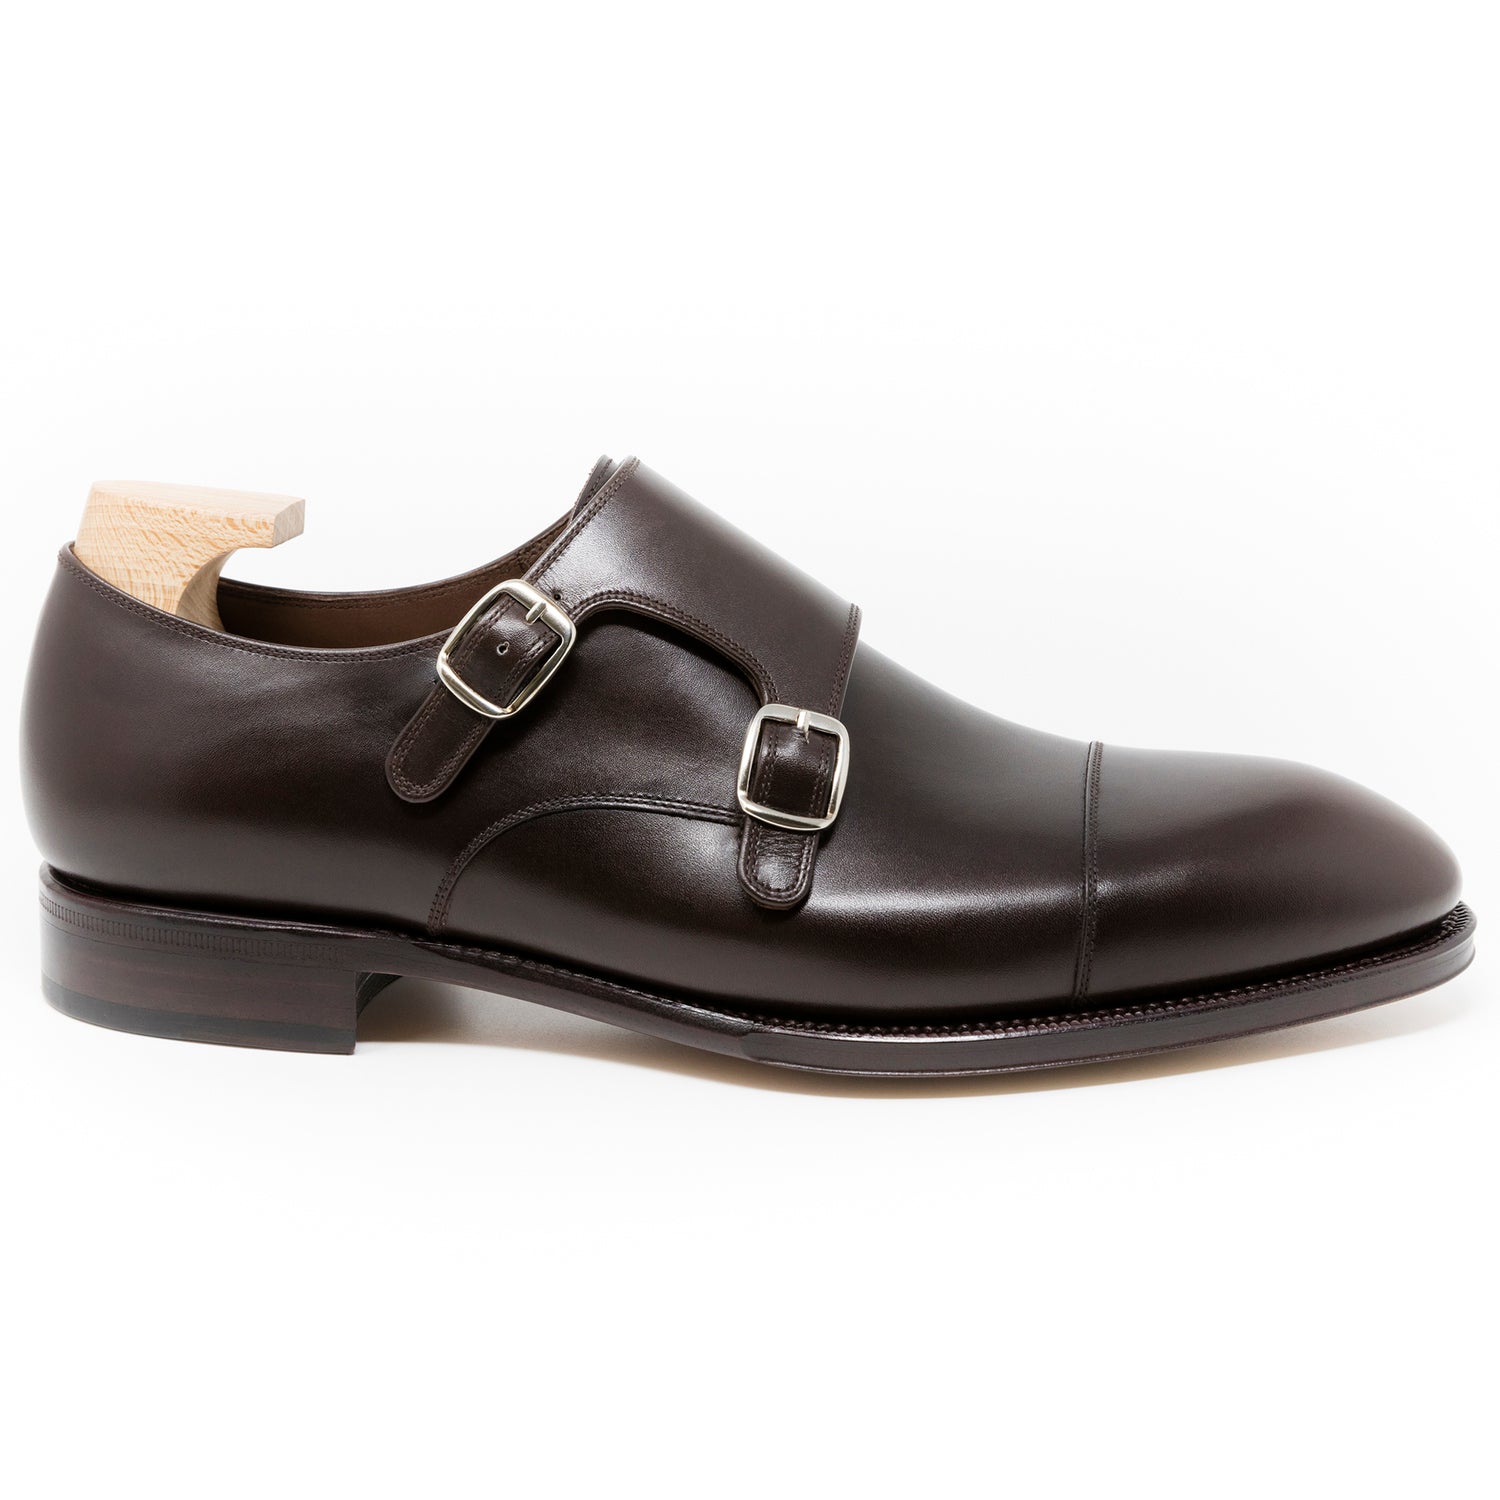 TLB Mallorca leather shoes 517 / OLIVER / BOXCALF BROWN